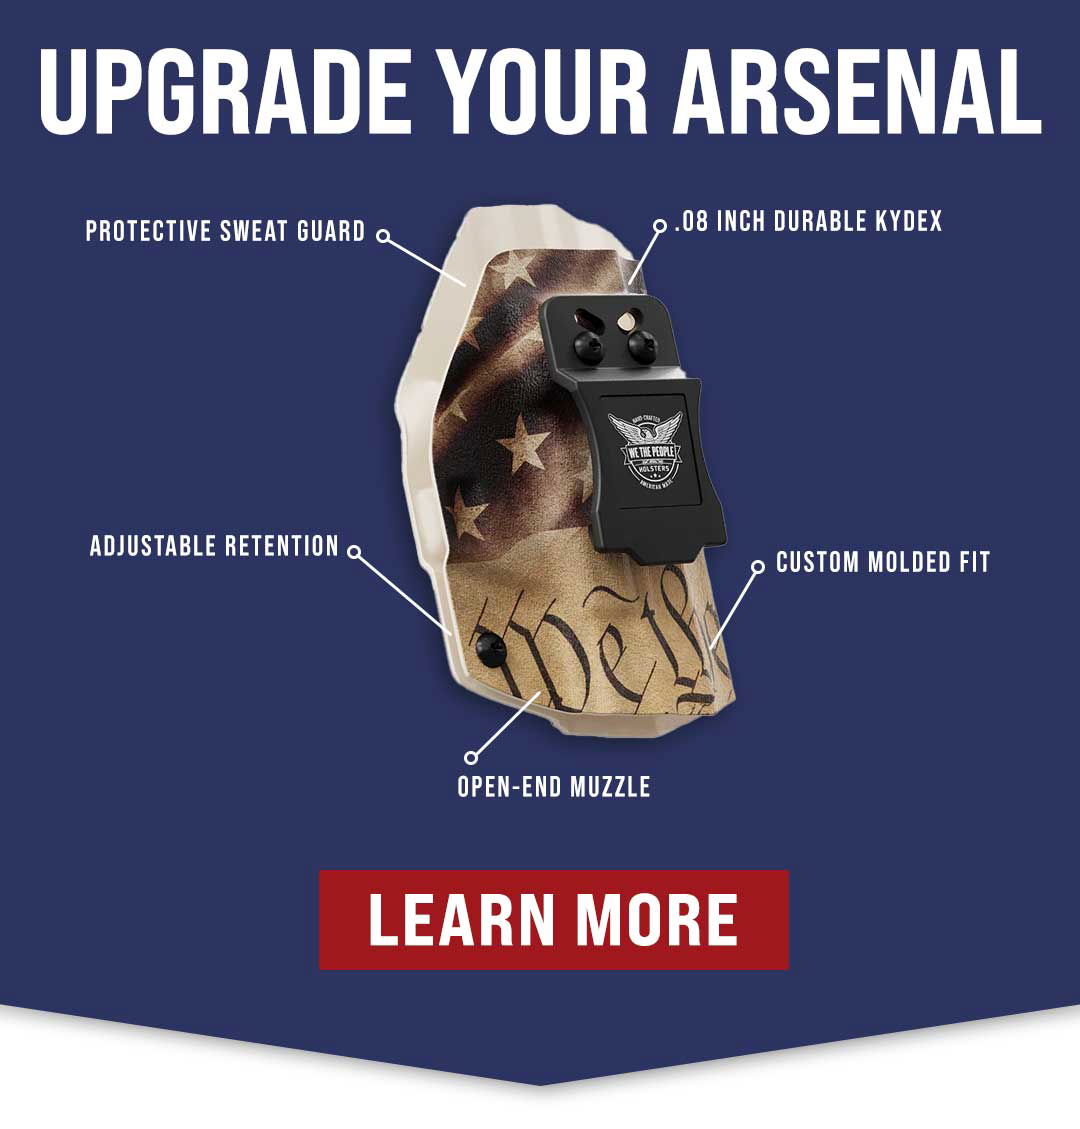 Upgrade Your Arsenal